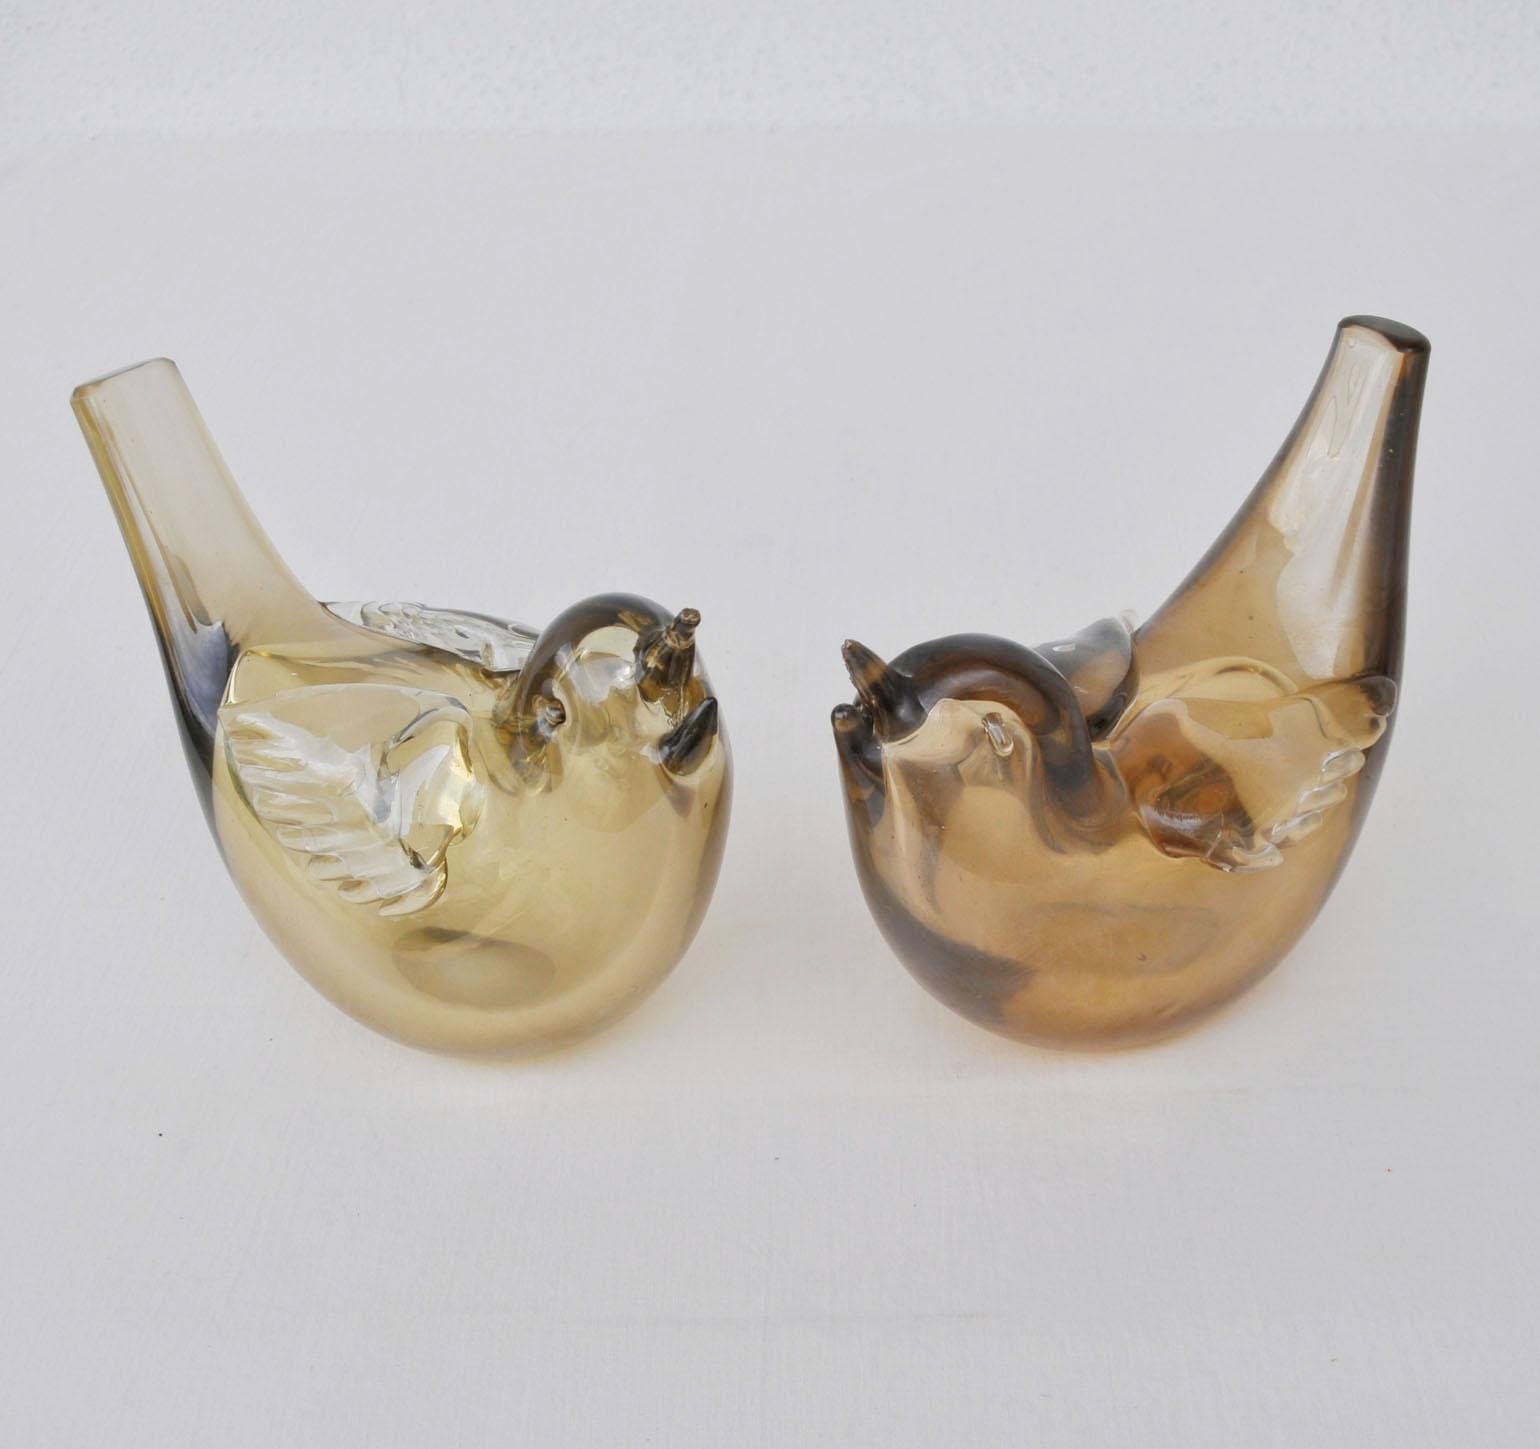 Italian Pair of Birds Sculpture Hand Blown Glass by Tyra Lundgren for Paolo Venini  1940